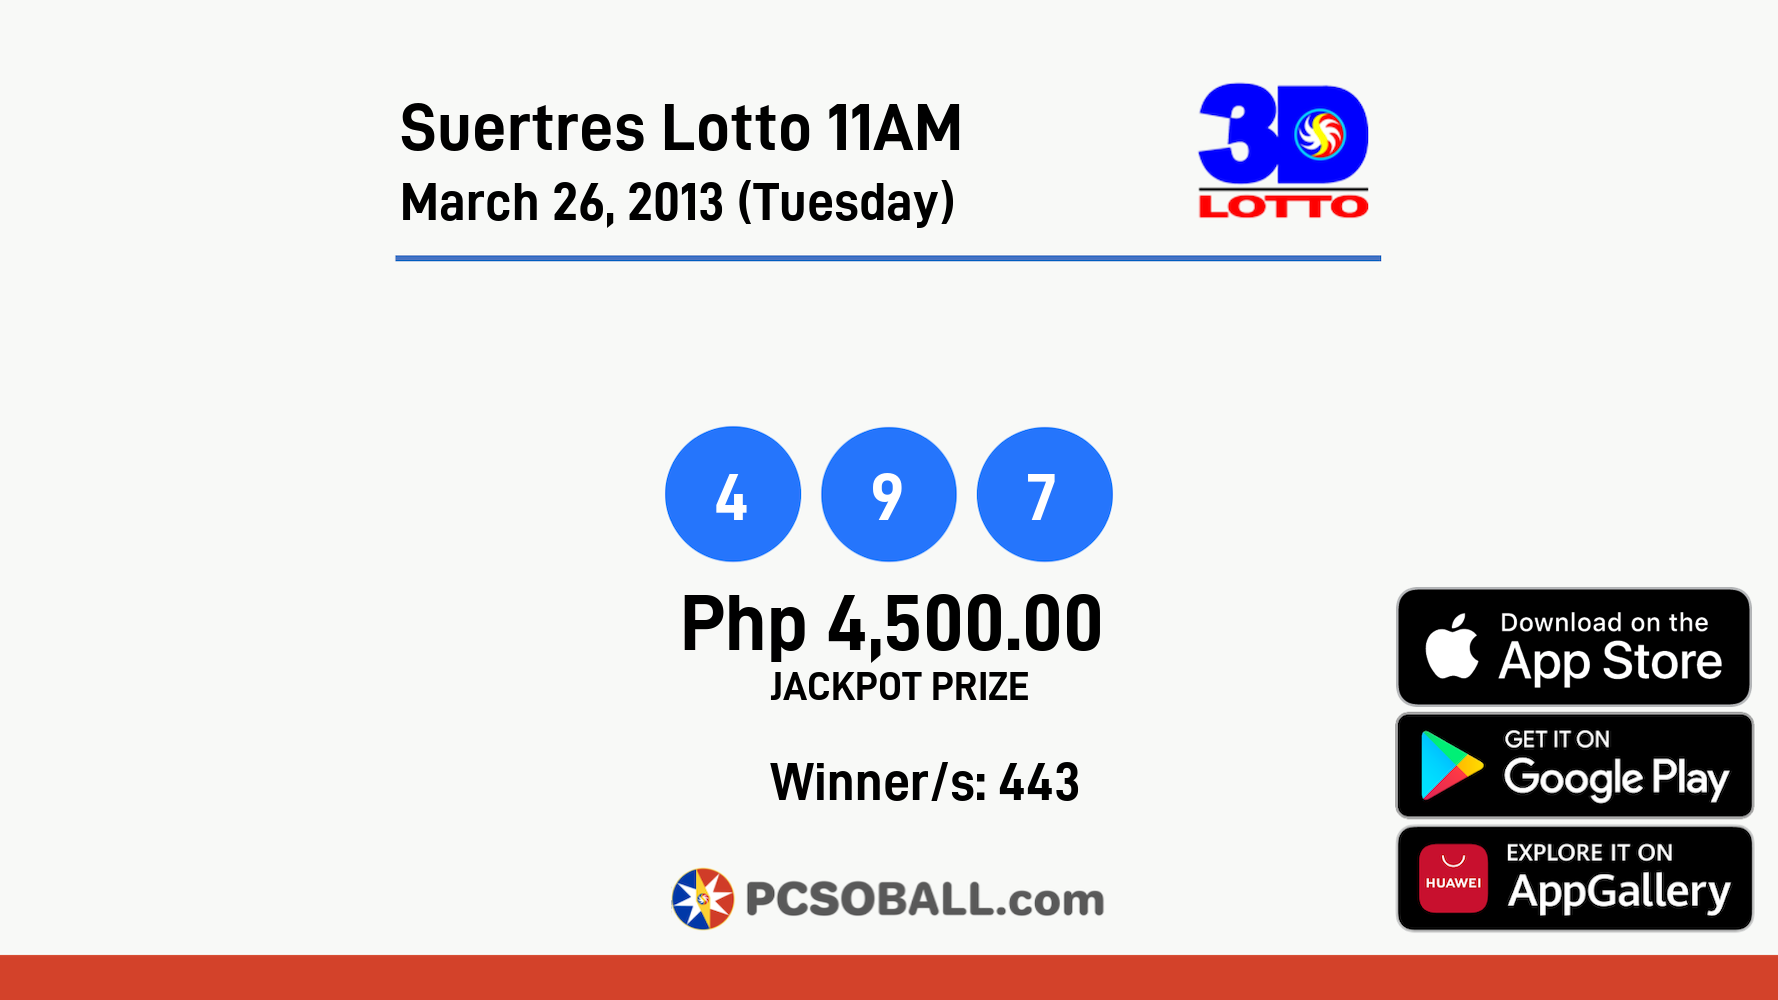 Suertres Lotto 11AM March 26, 2013 (Tuesday) Result